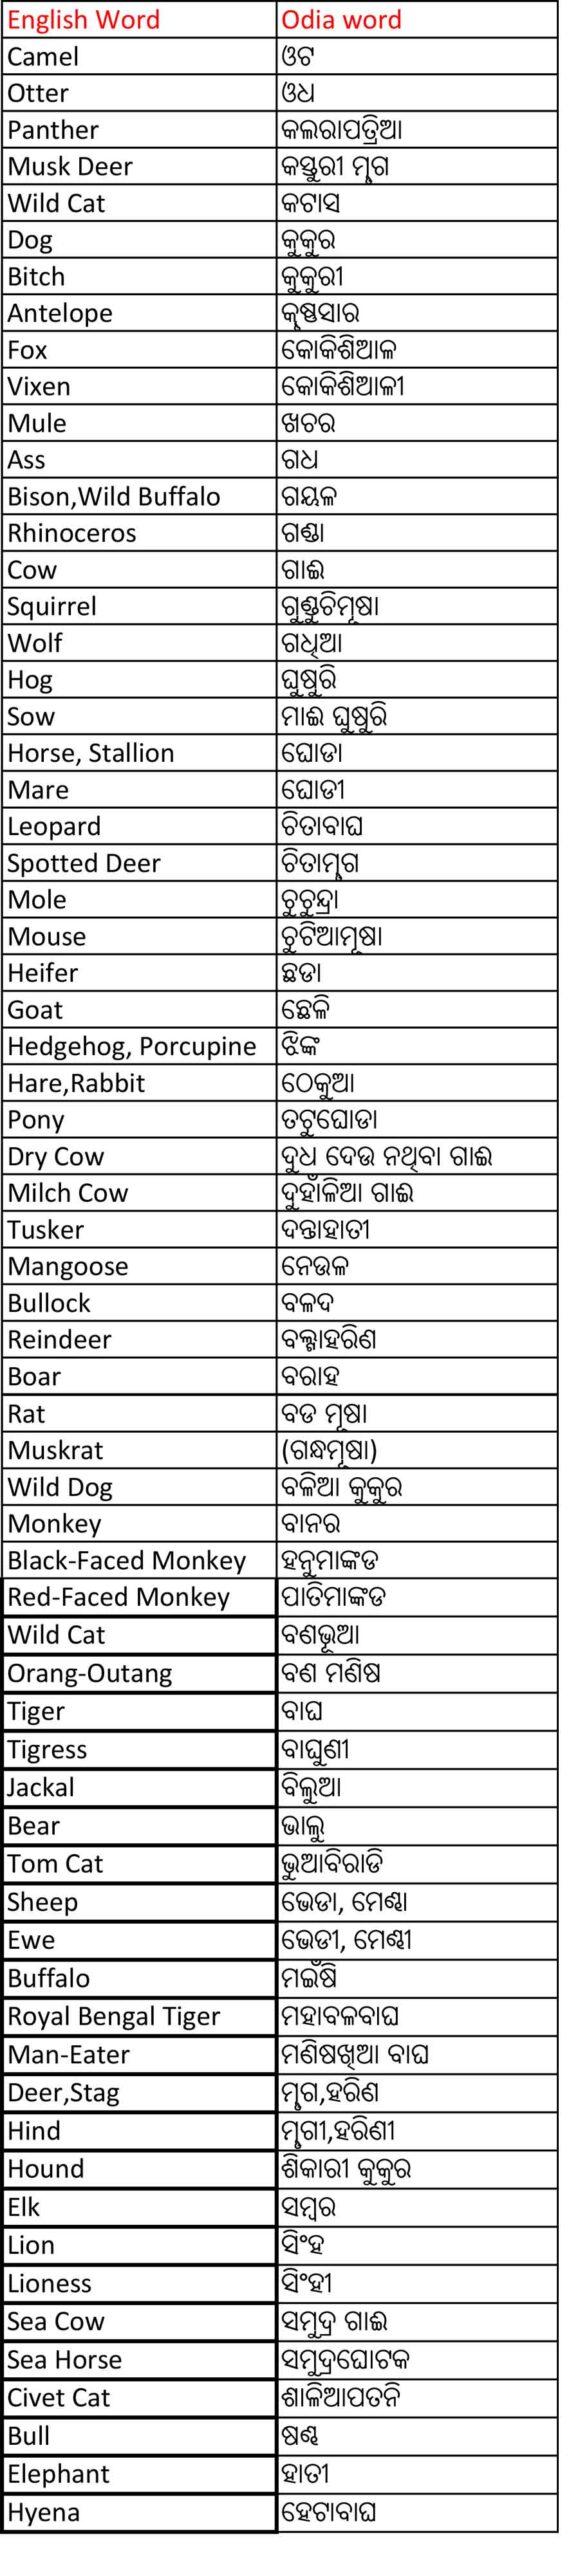 Animal Names in English and Odia